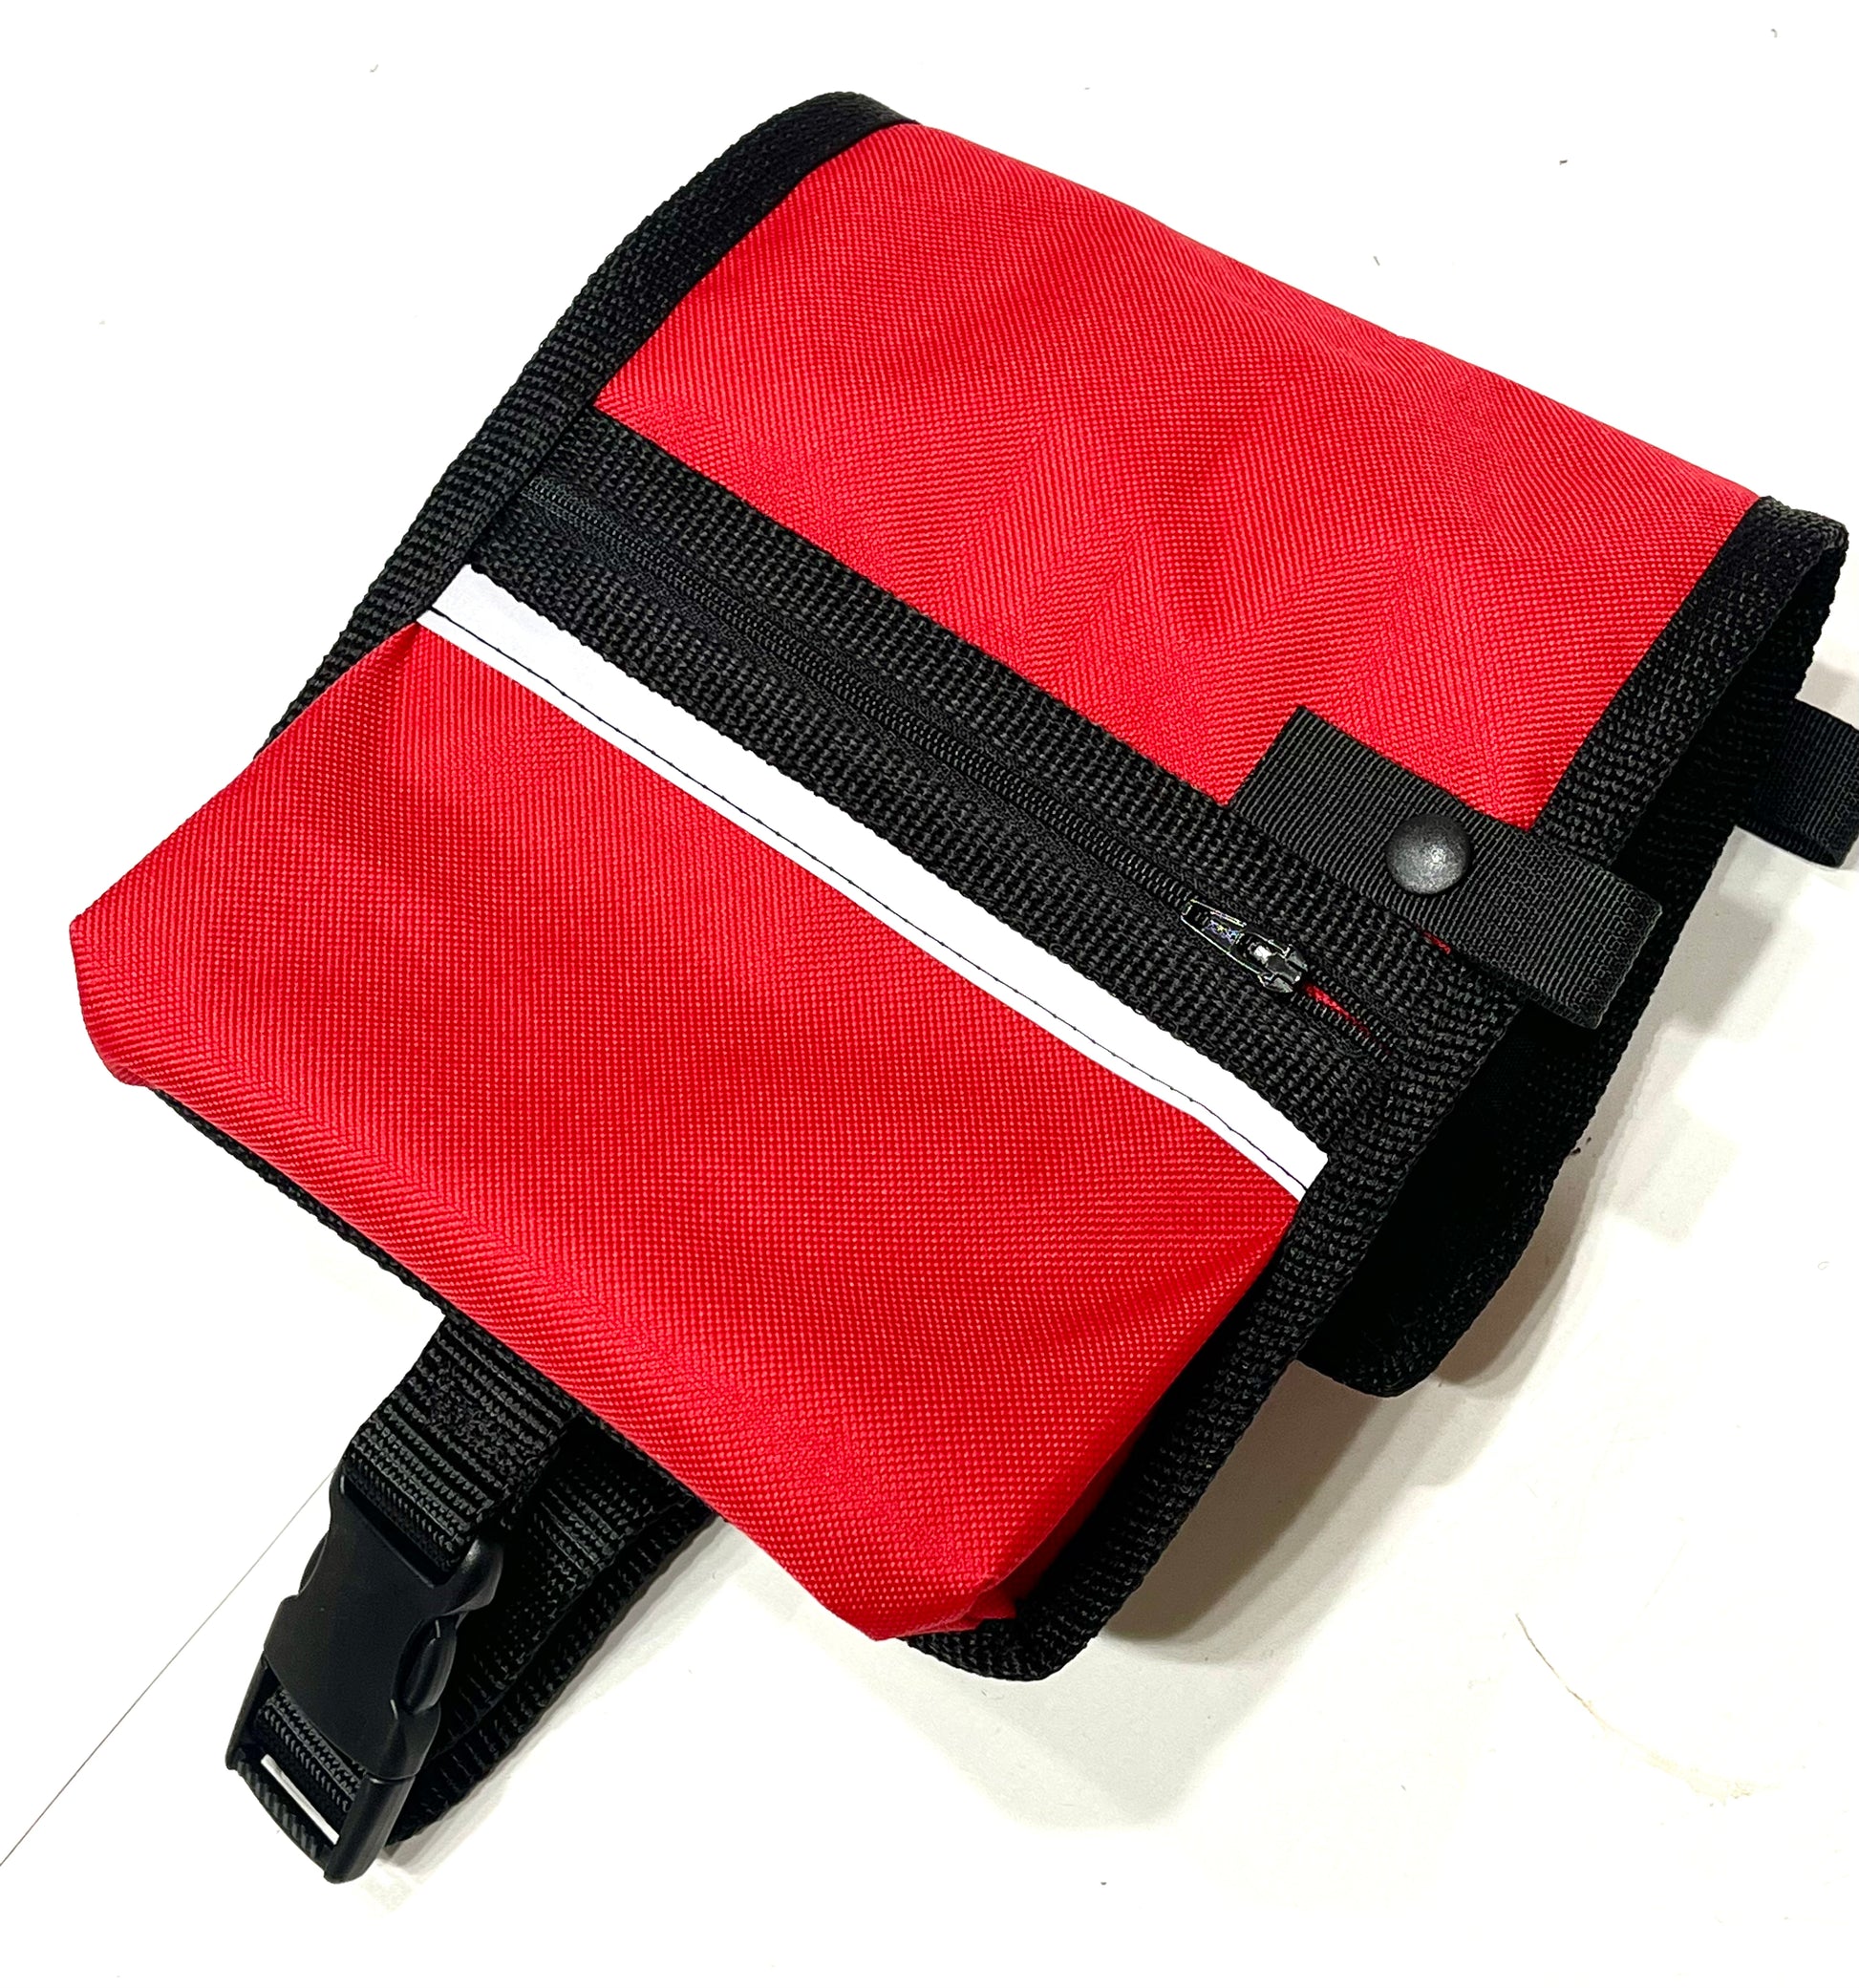 a bright red dog cape with zippered pockets, black bonding and silver reflective strips 